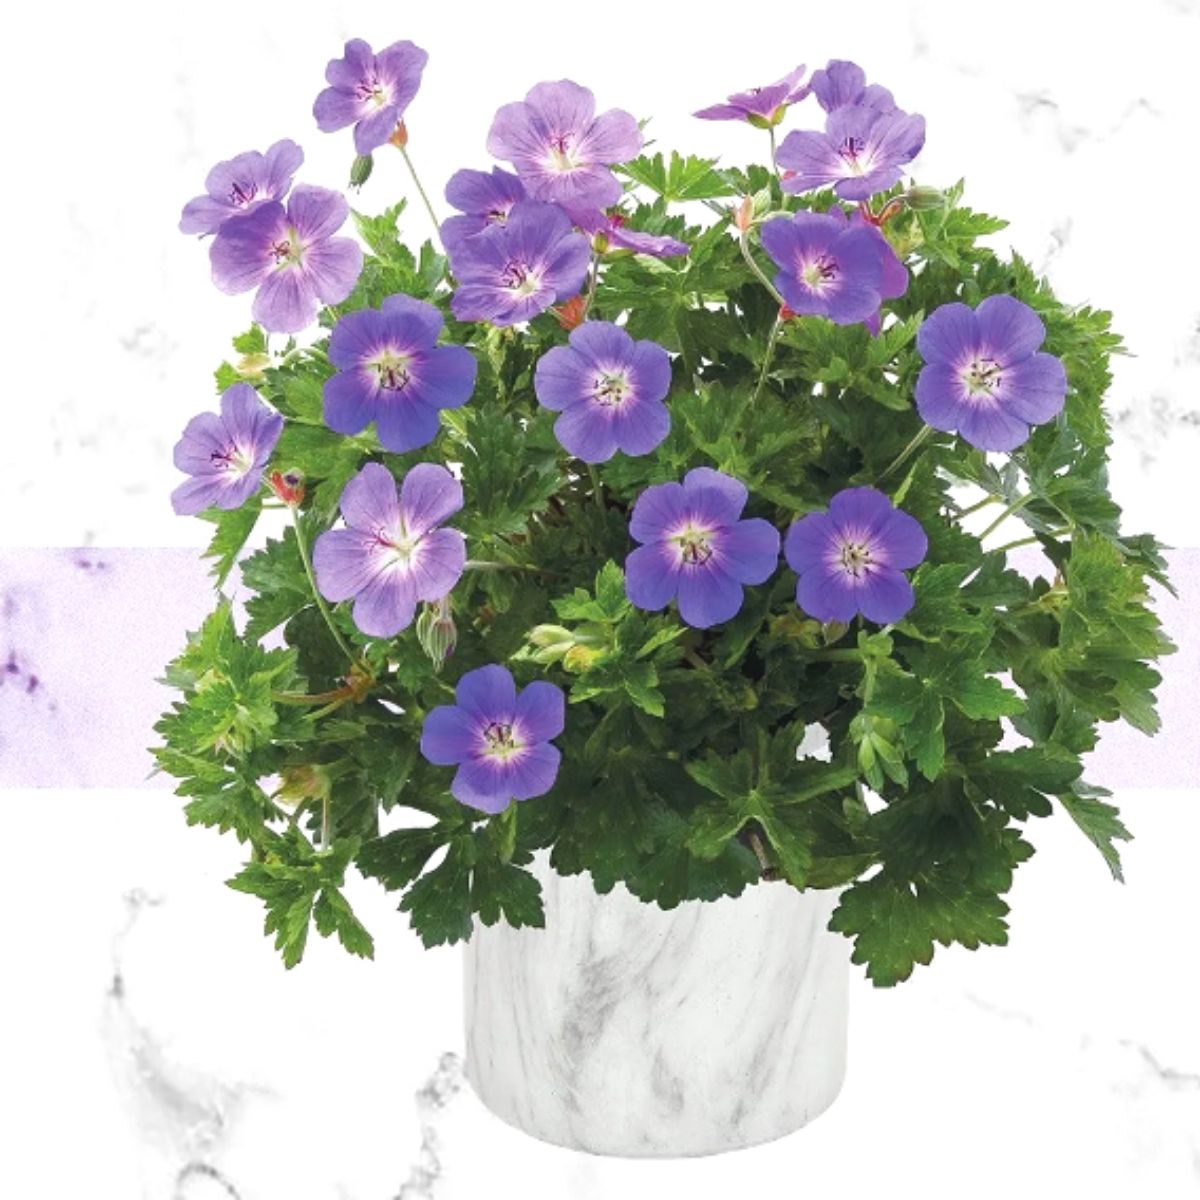 geranium-bloom-me-away-is-the-summer-flower-that-is-blooming-and-impressing-at-first-sight-featured